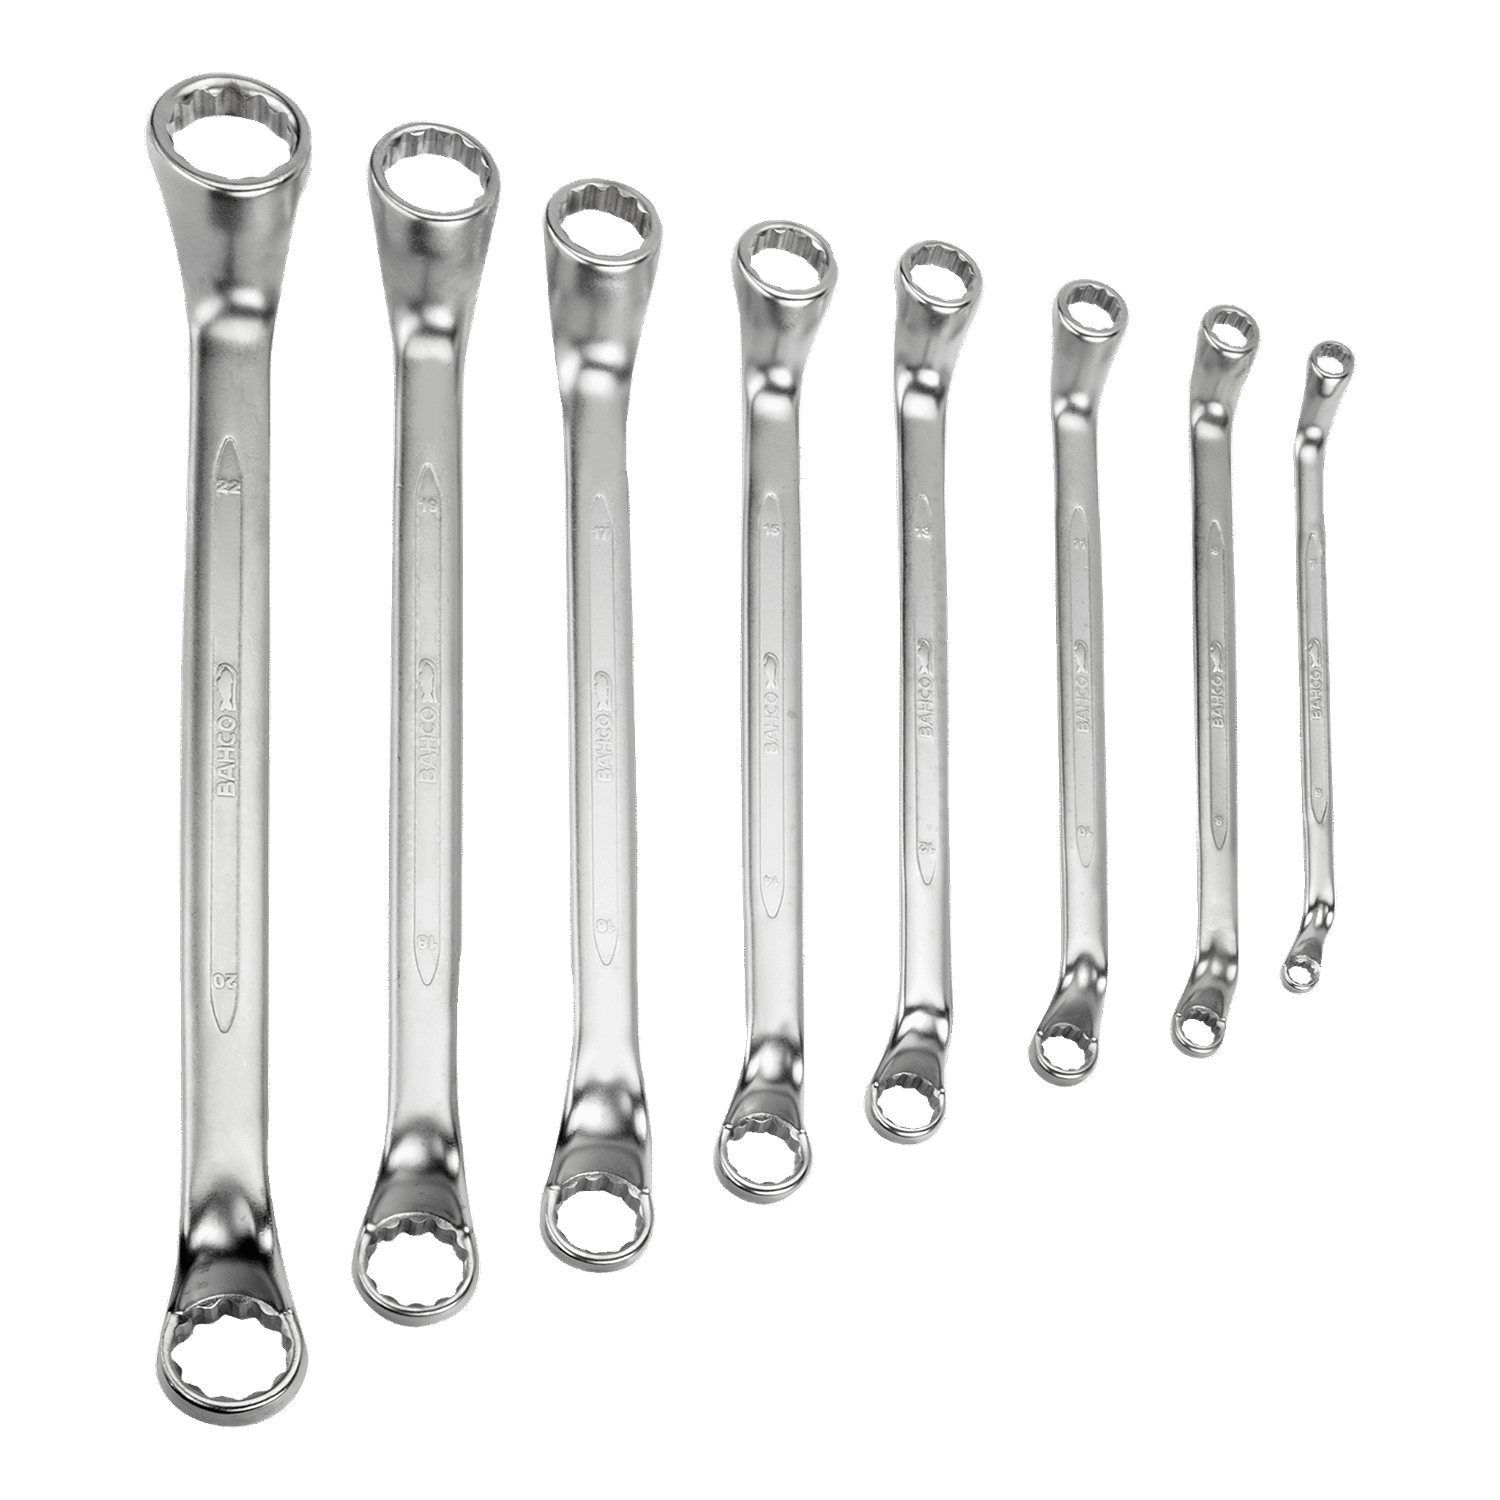 BAHCO 2M/S8 Metric Deep Offset Double Ring Ended Wrench Set 8 Pcs - Premium Offset Double Ring Ended Wrench Set from BAHCO - Shop now at Yew Aik.